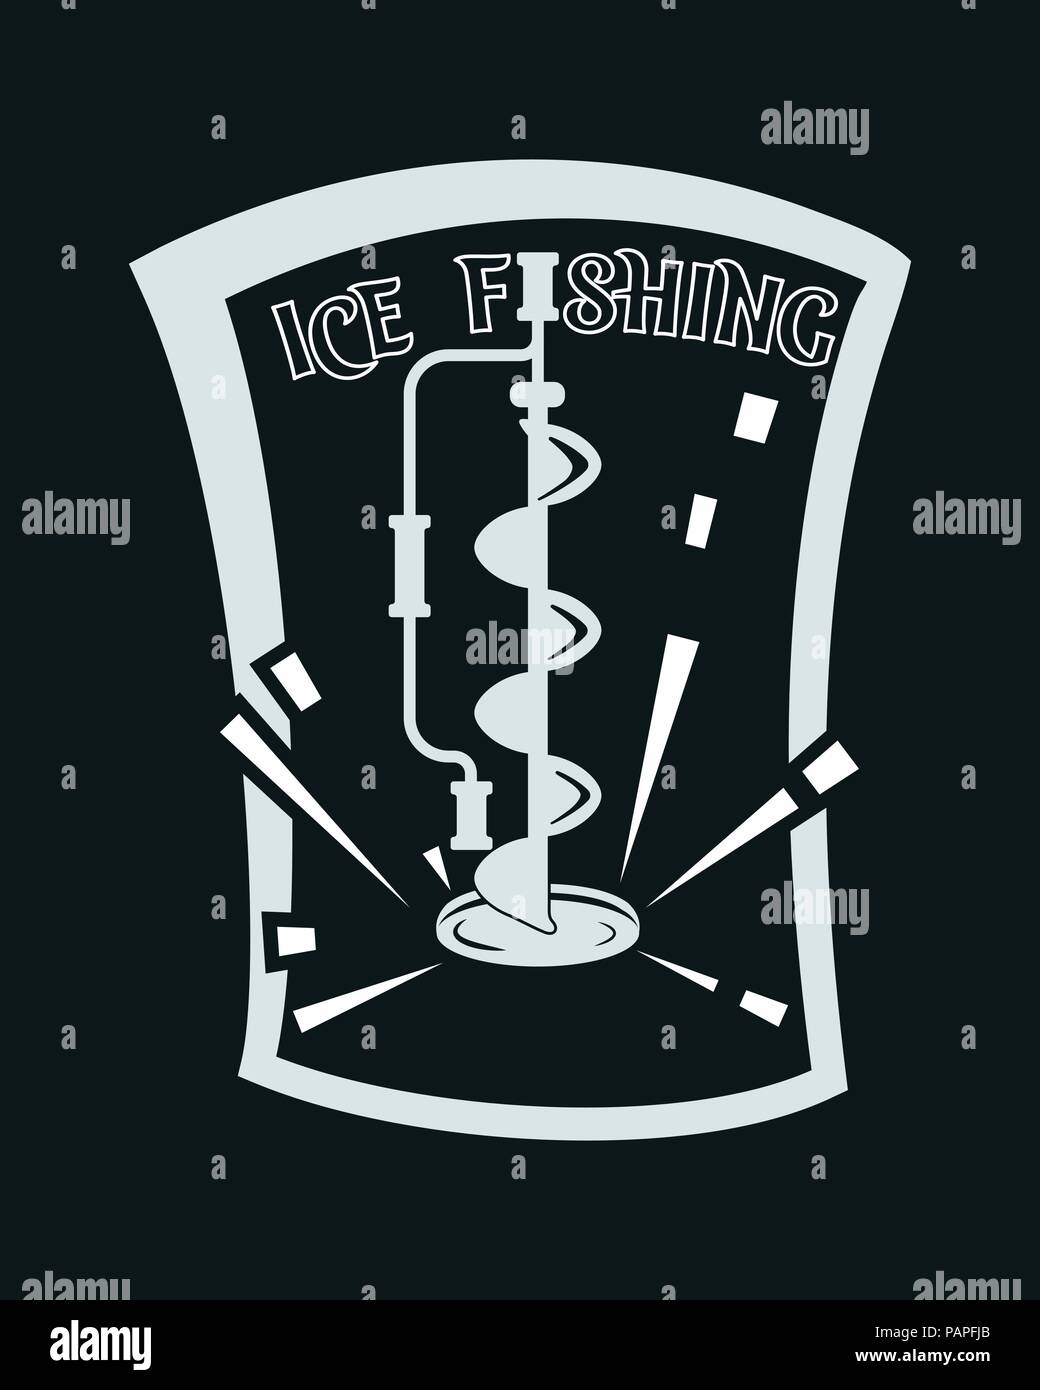 Ice fishing. Black and white vector illustration. Simple icon